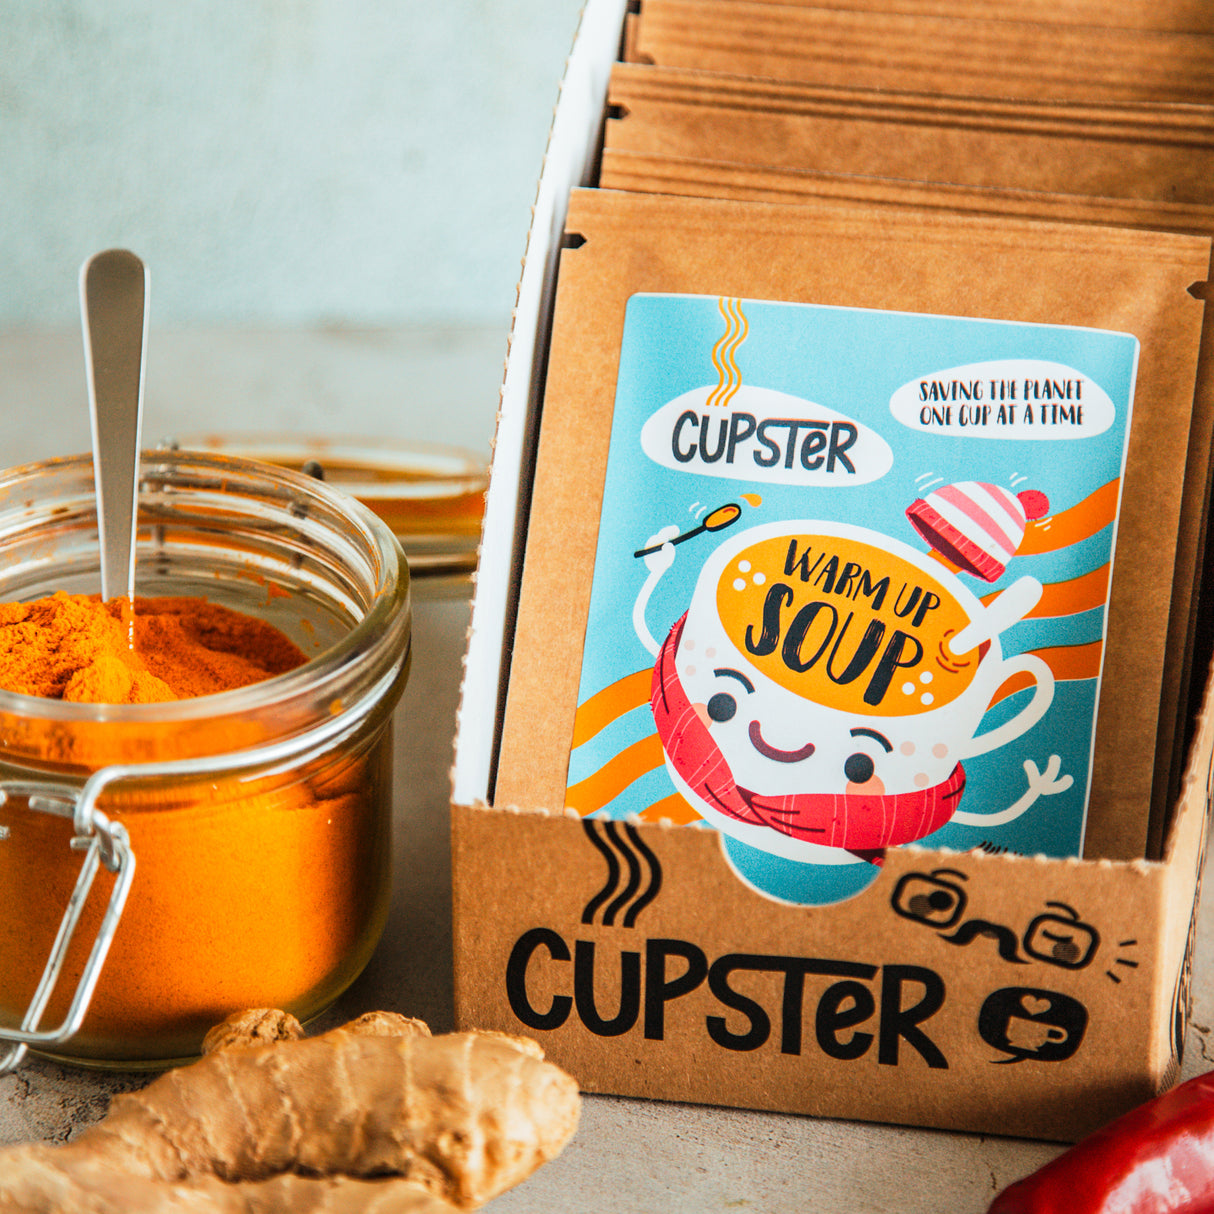 Cupster instant warm up soup 21g